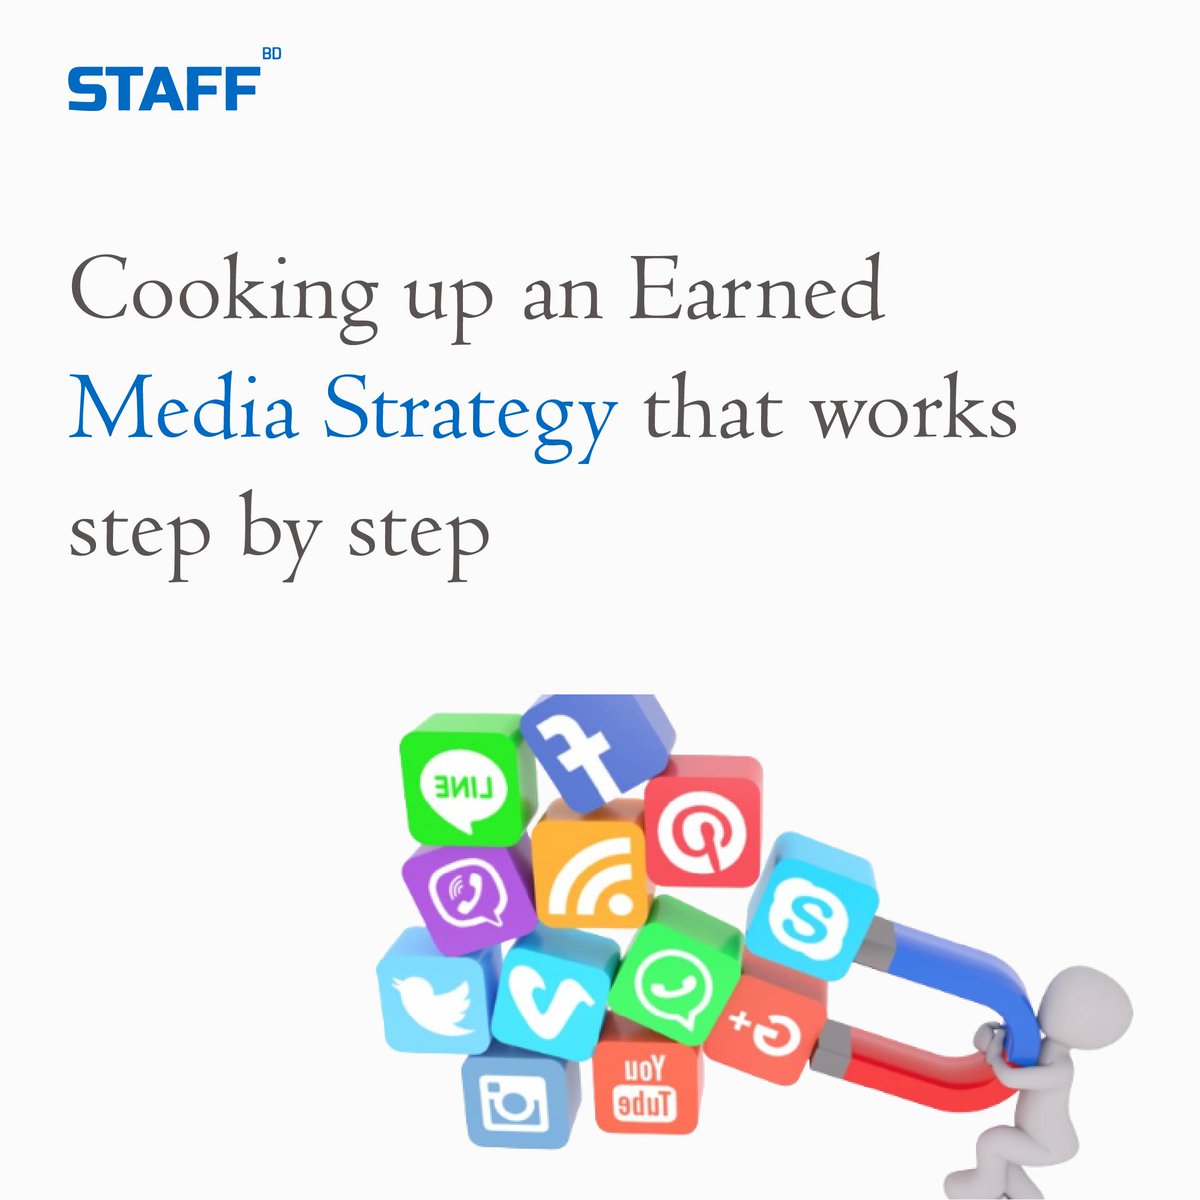 Stay with us to learn more about cooking up the perfect recipe for a winning Earned Social Media strategy, one step at a time! 📈

#ukagency #uksmallbusiness #ukbusiness #ukstartup #businessgrowth